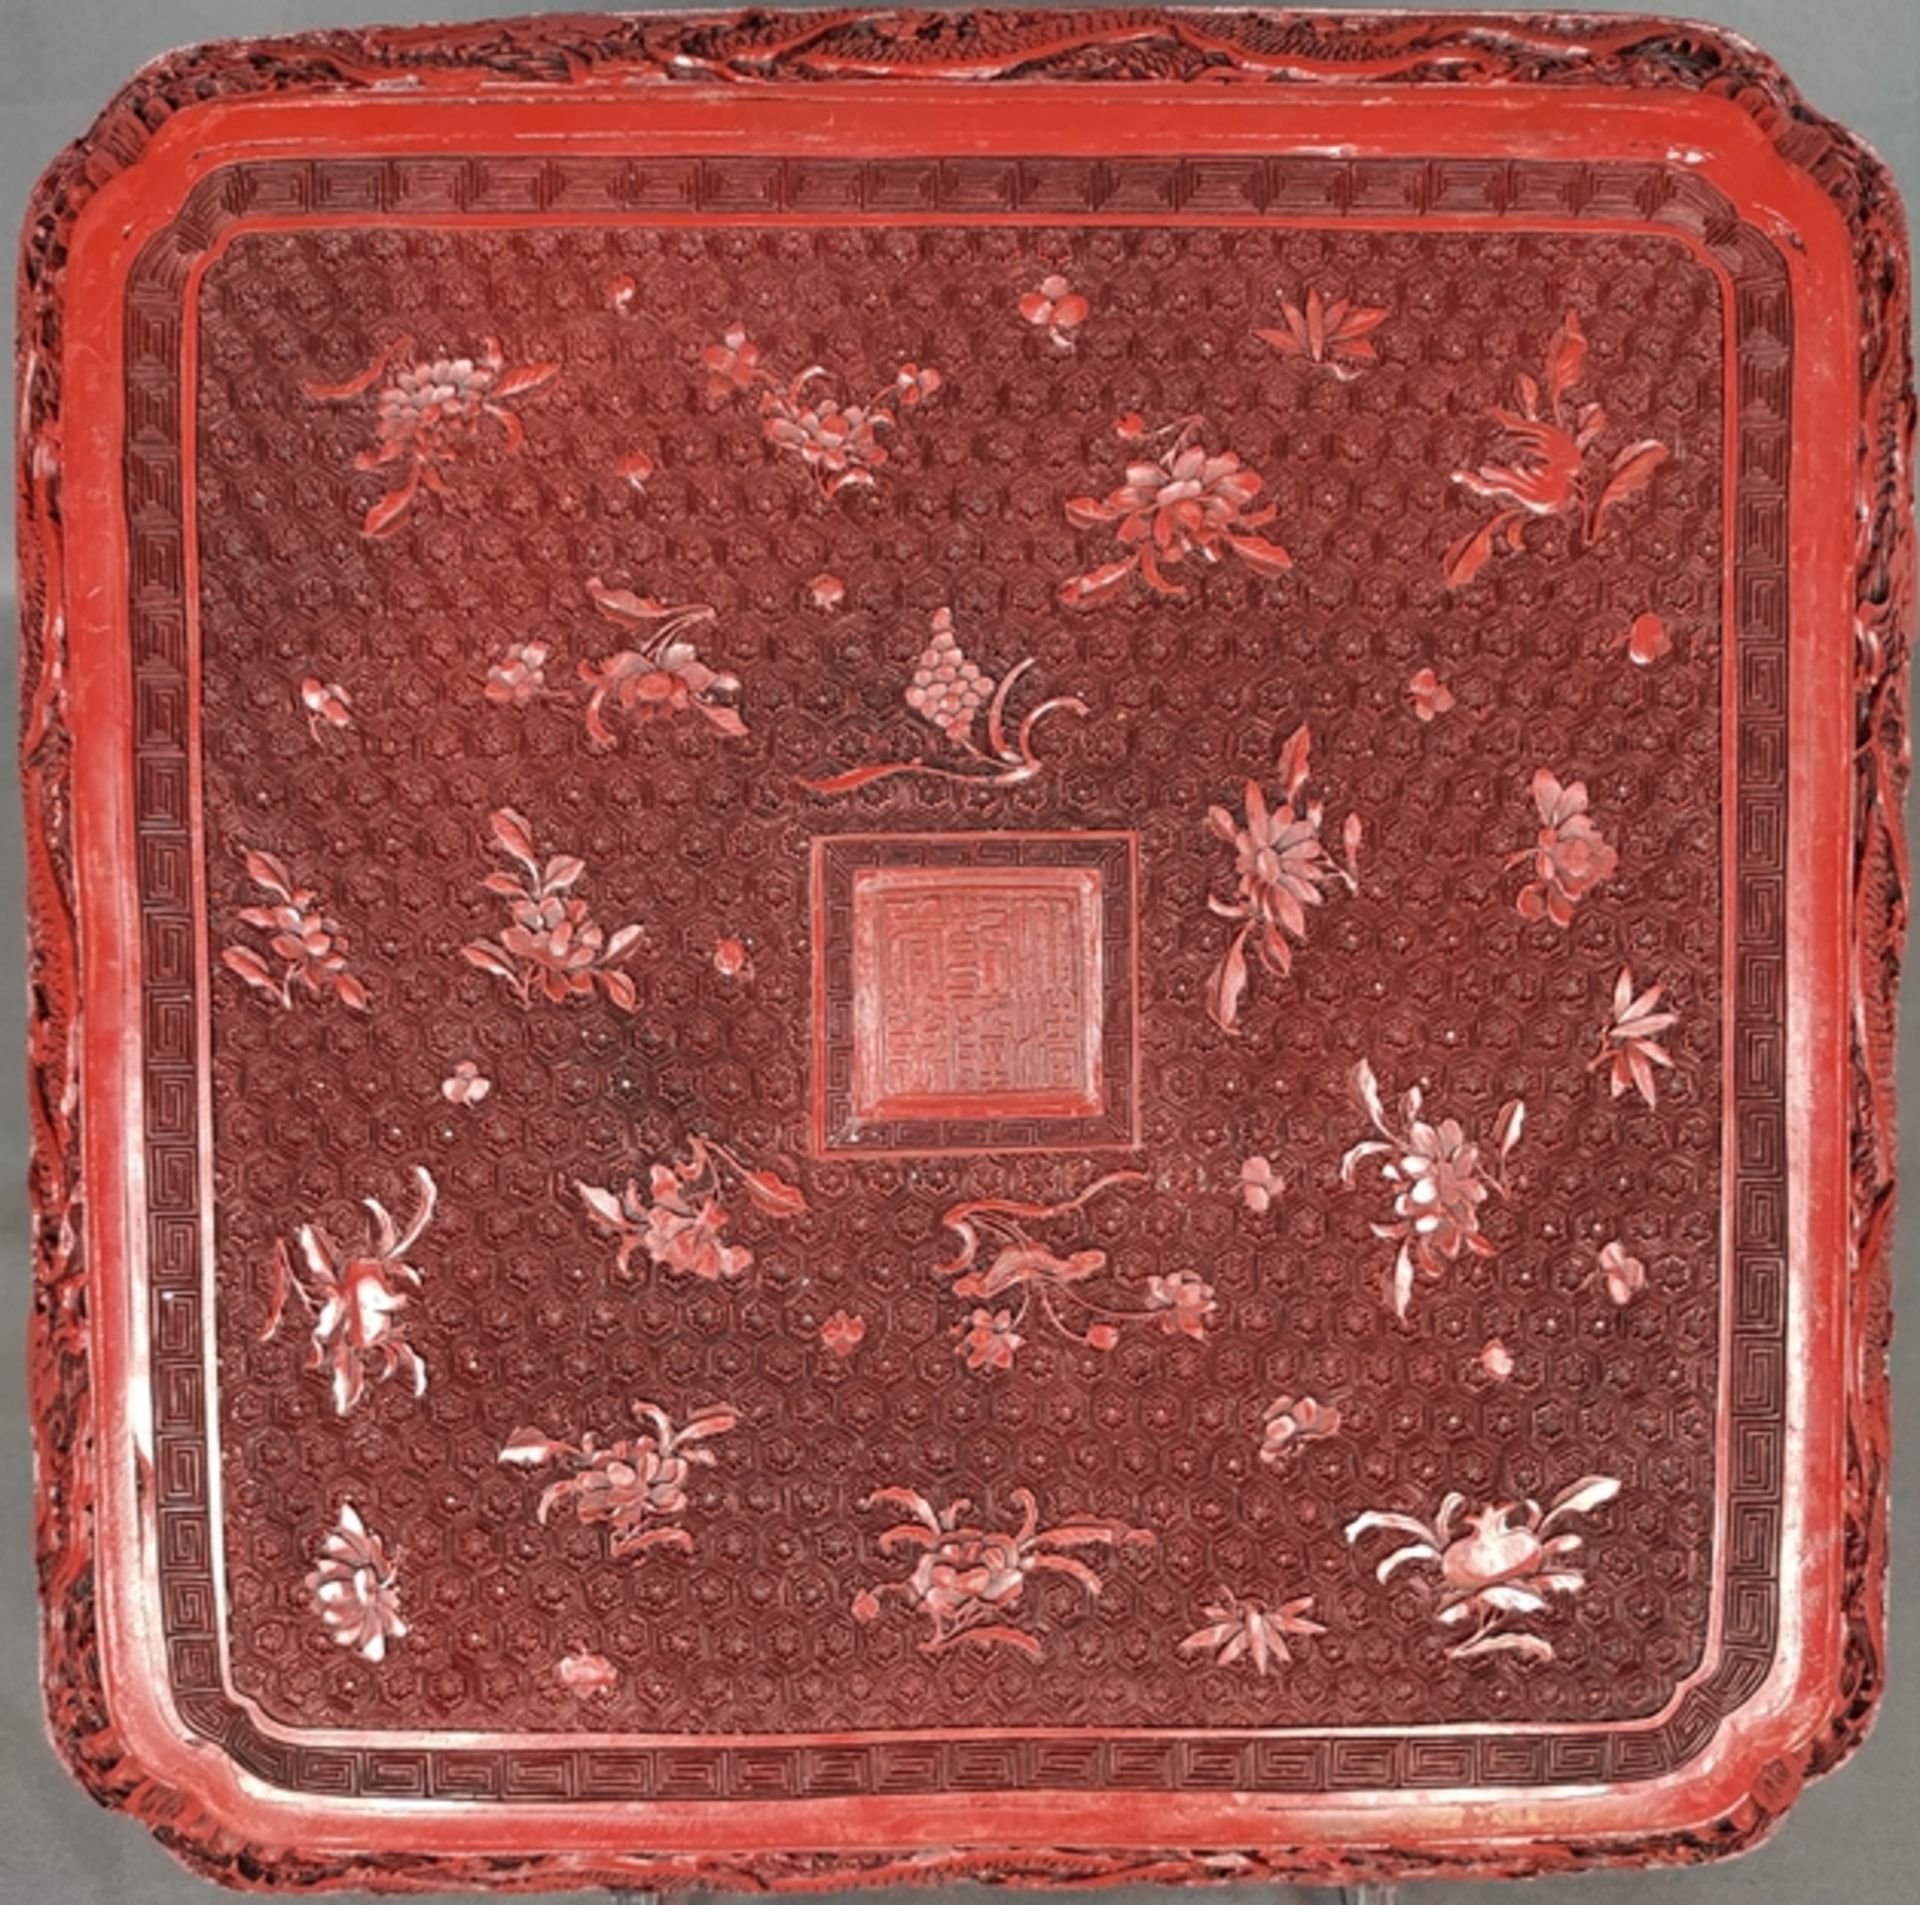 Tray richly carved with figural scenes, museum copy, archaic Qianlong mark, 32x32cm - Image 2 of 3